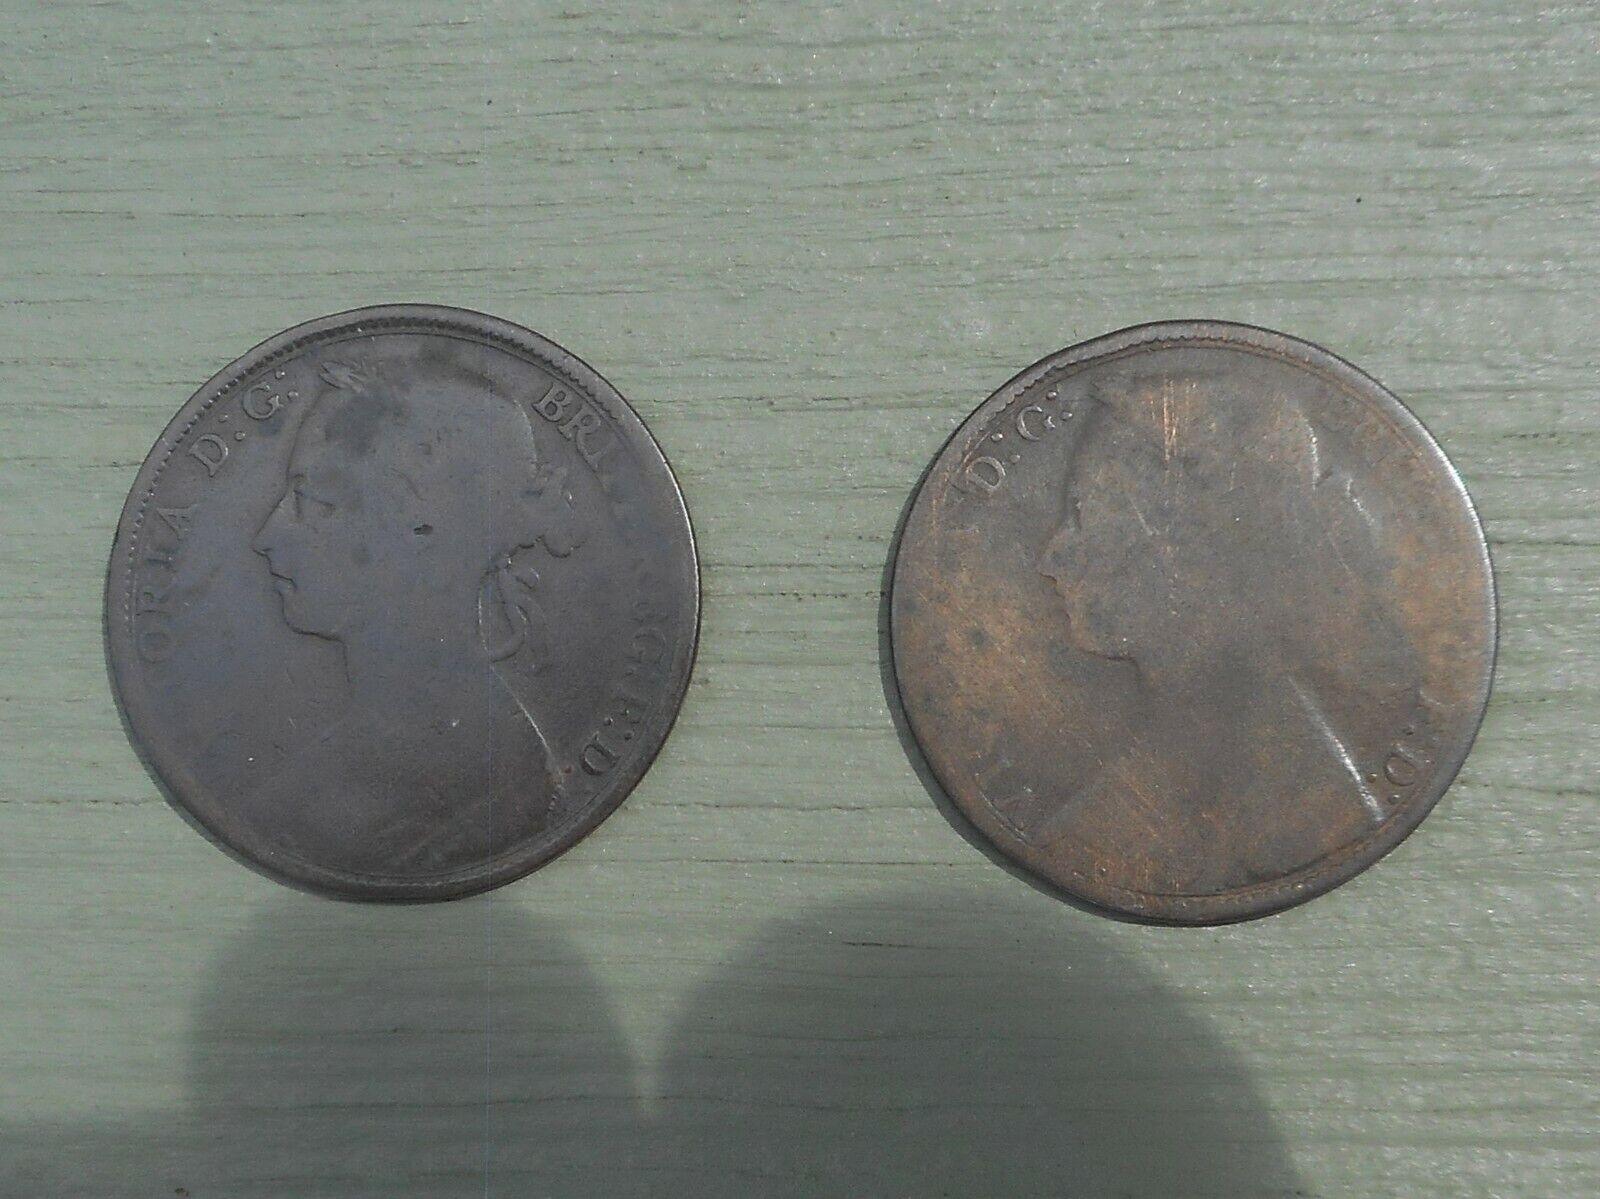 1877 & 1890 LOT OF 2 COINS BRITAIN One Penny 1 Pence Cent Queen Victoria Без бренда - фотография #12